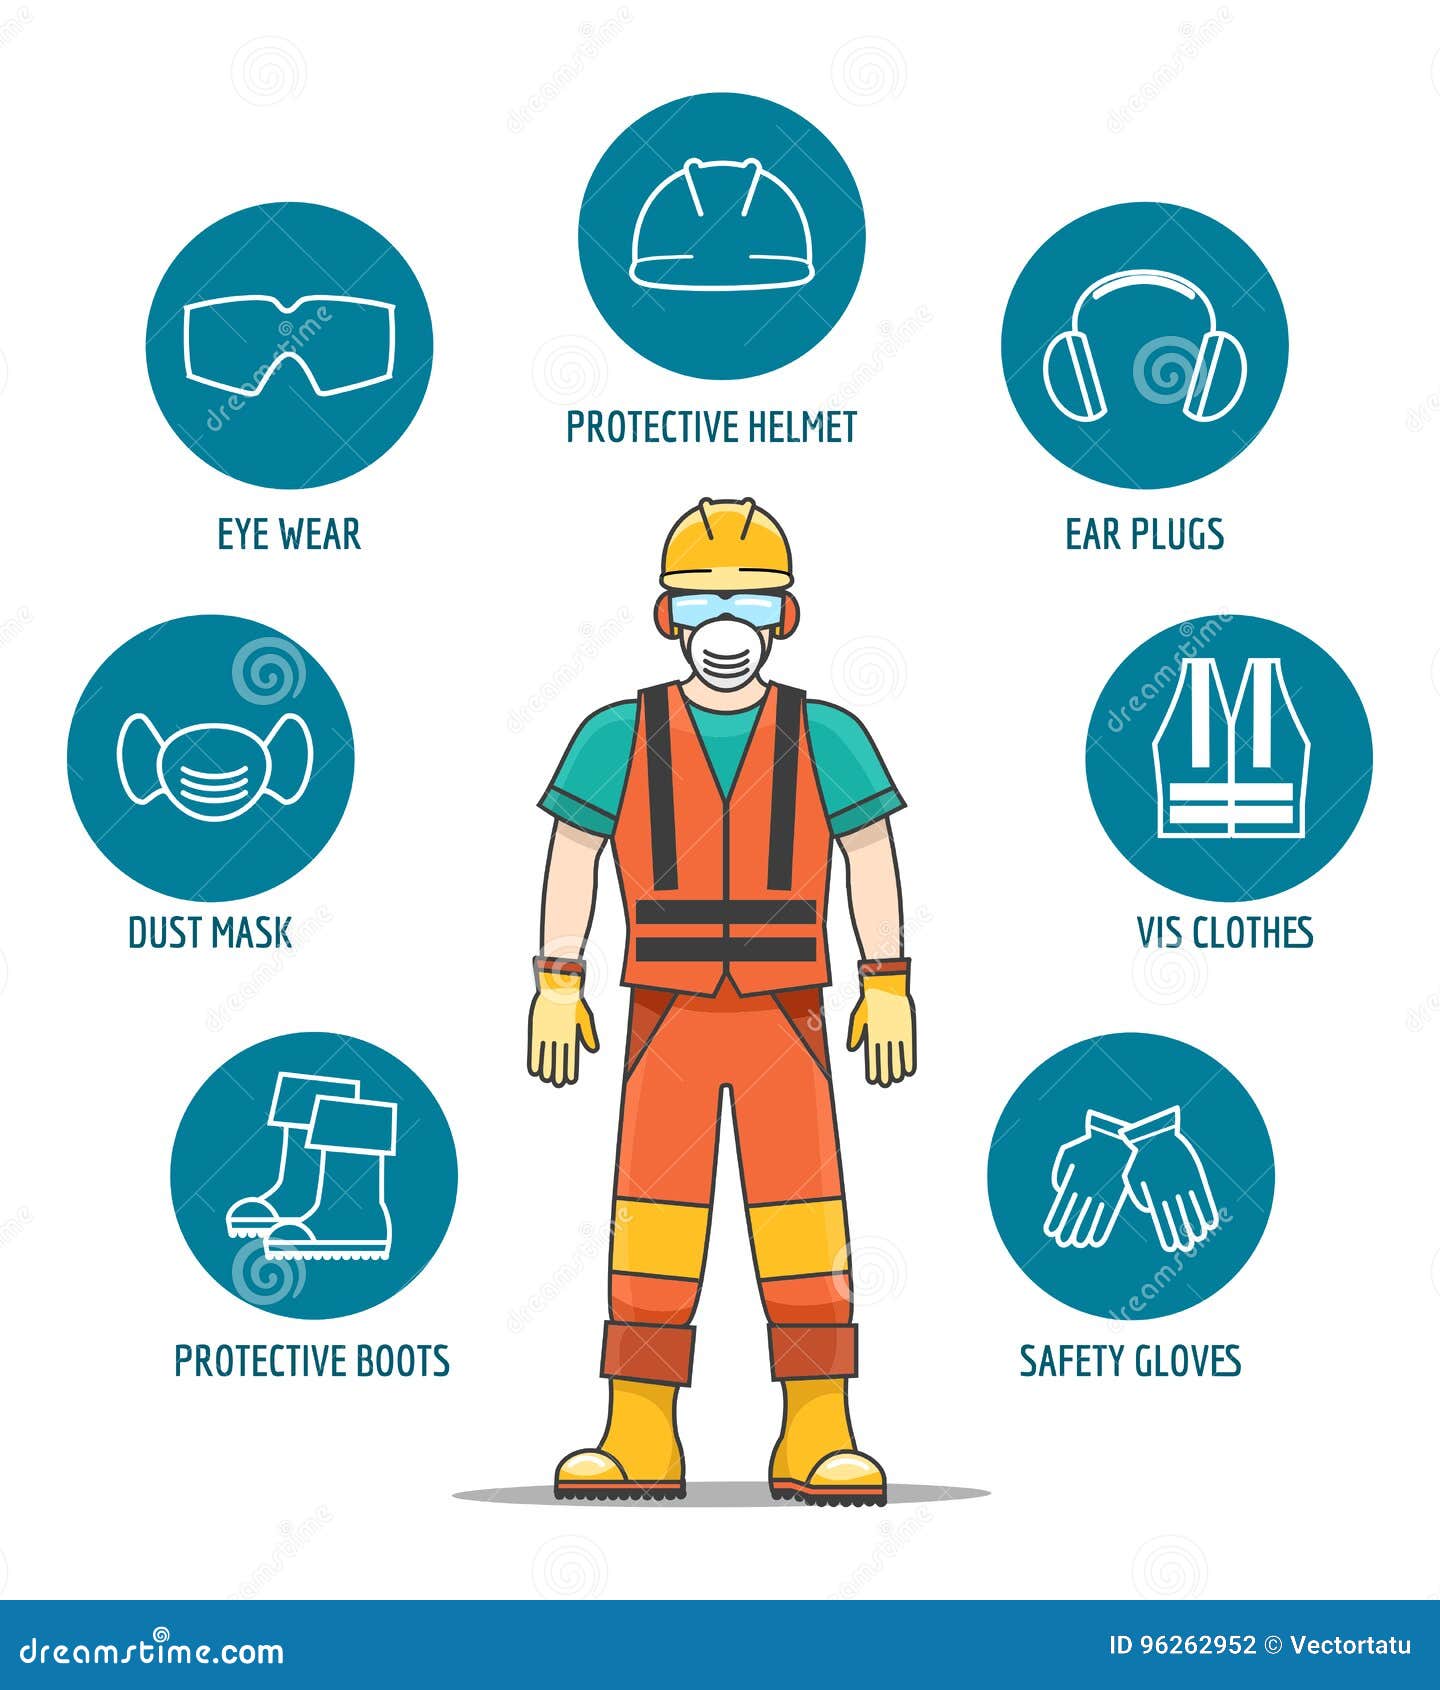 protective and safety equipment